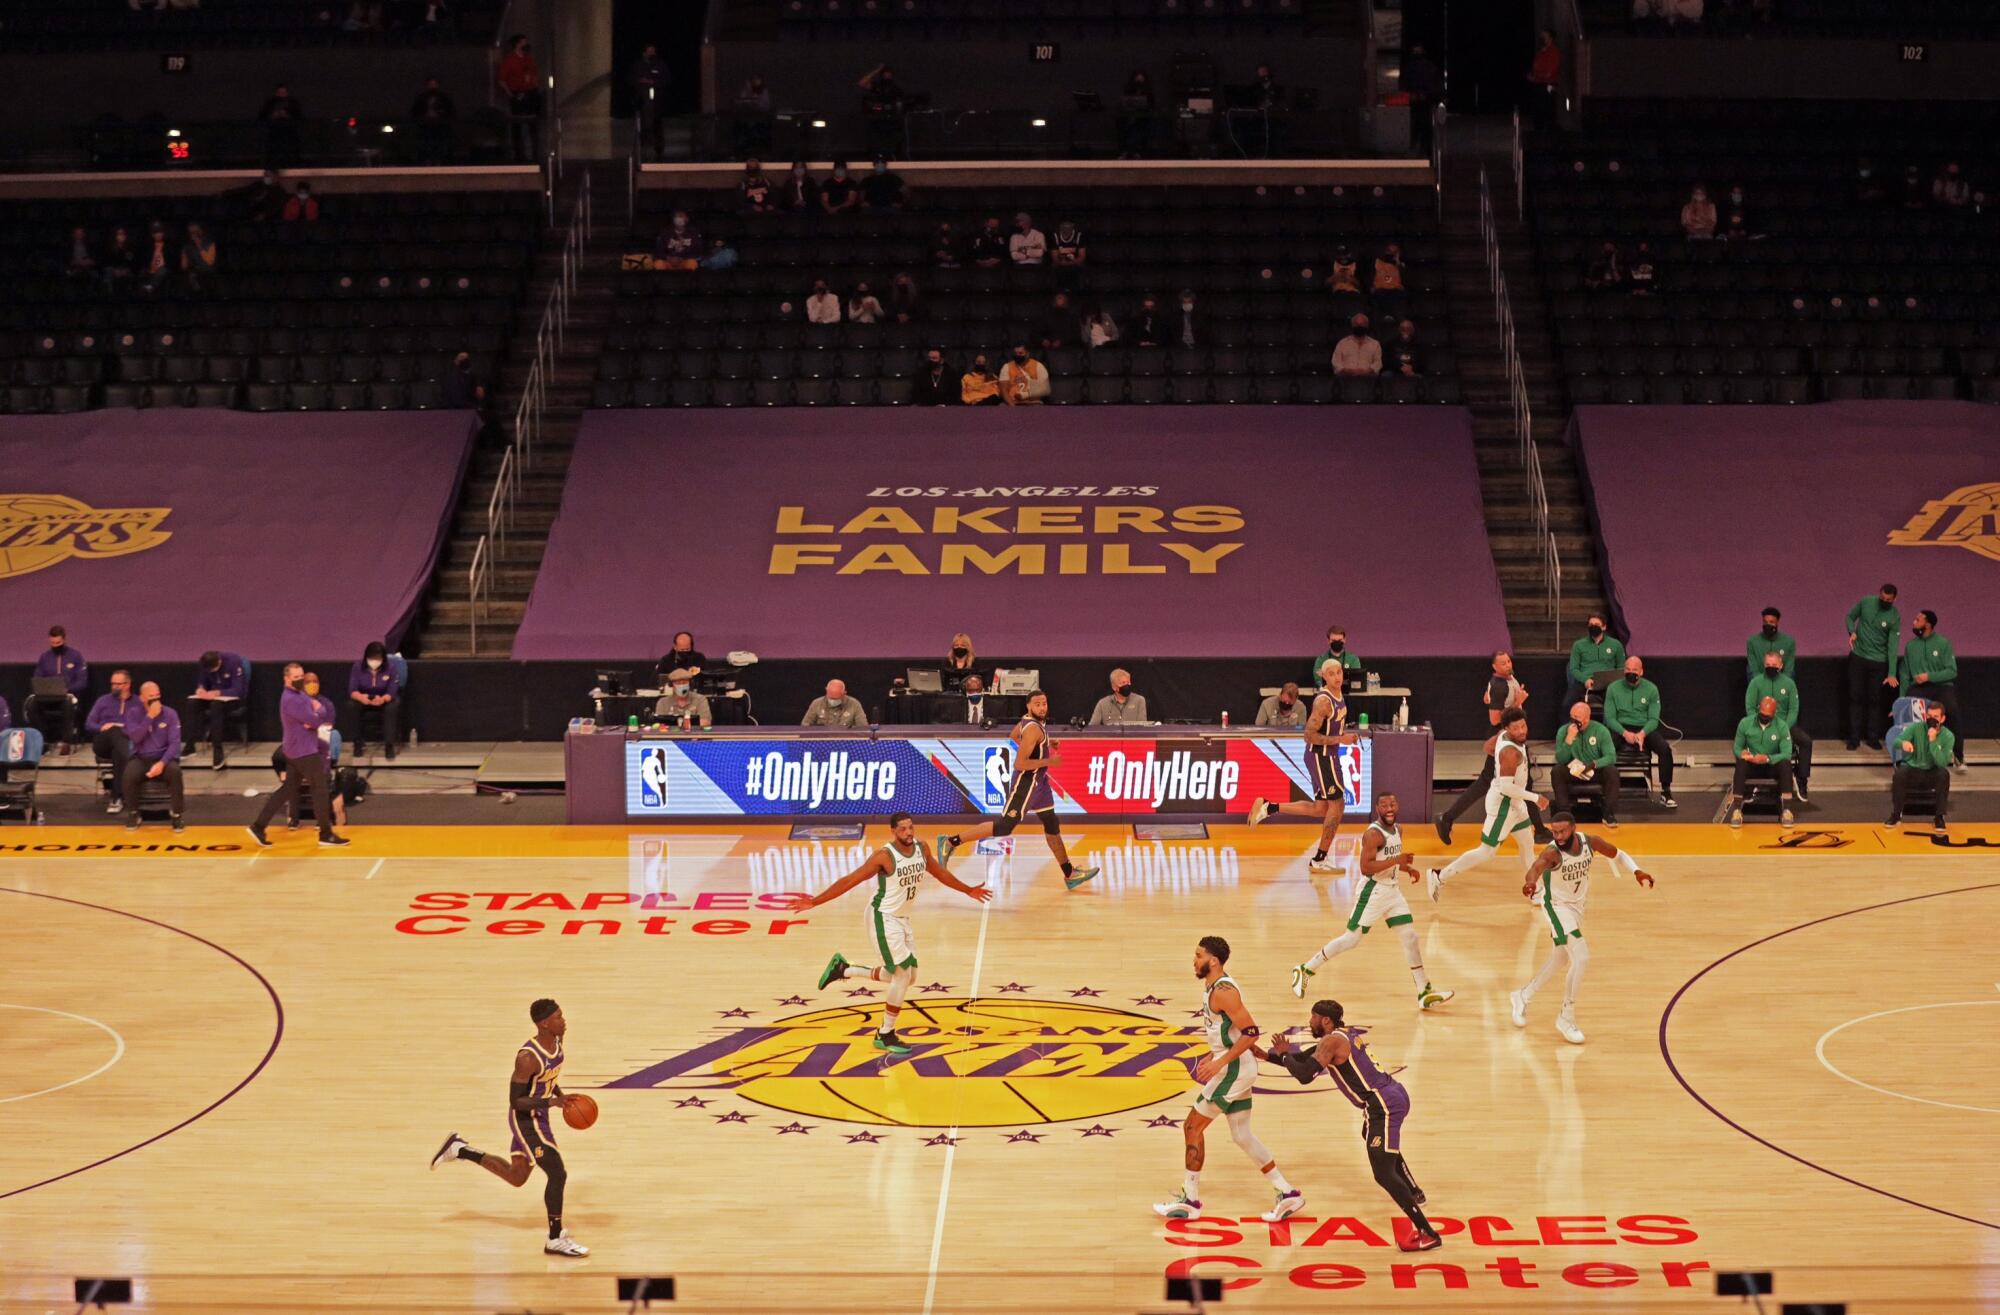 Lakers fans get Staples Center buzzing again with activity - Los